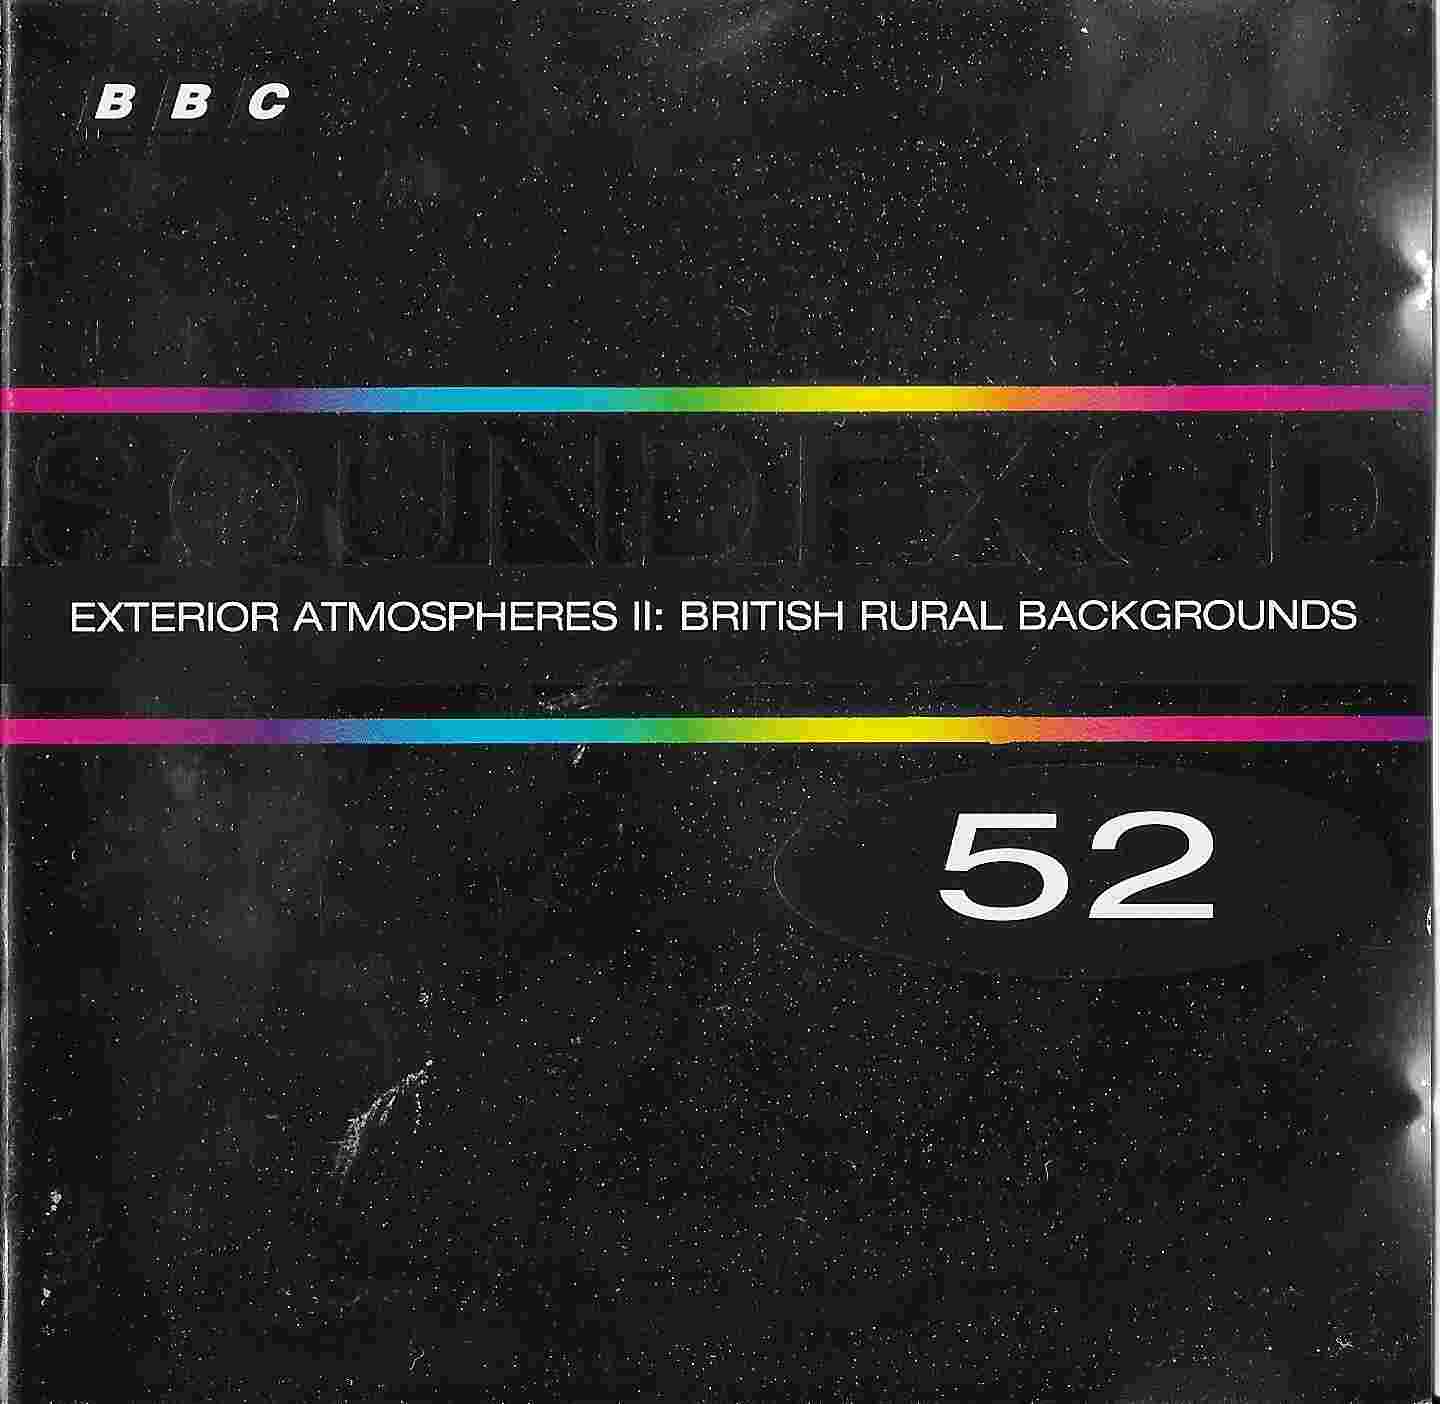 Picture of BBCCD SFX052 Exterior atmospheres II: British rural backgrounds by artist Various from the BBC cds - Records and Tapes library